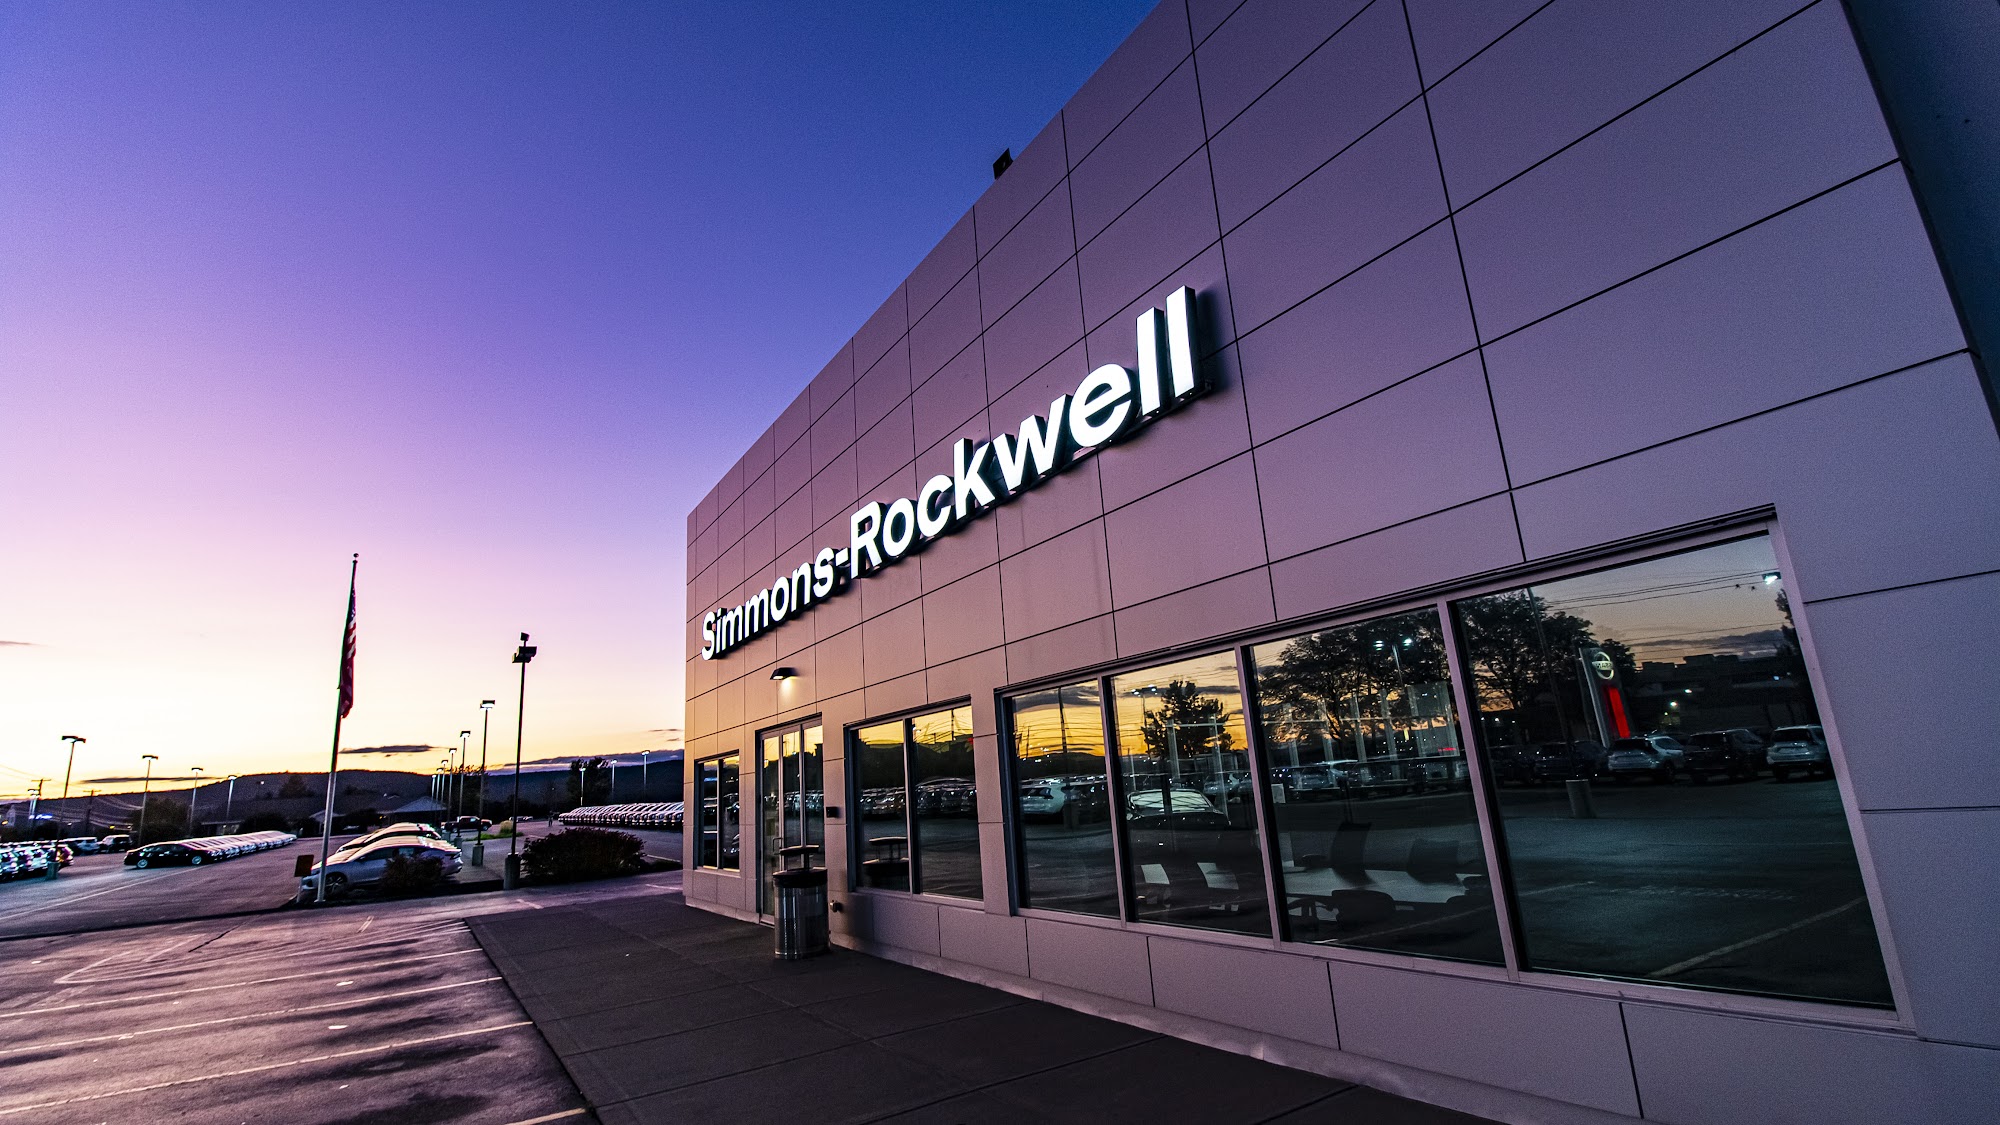 Simmons-Rockwell Nissan